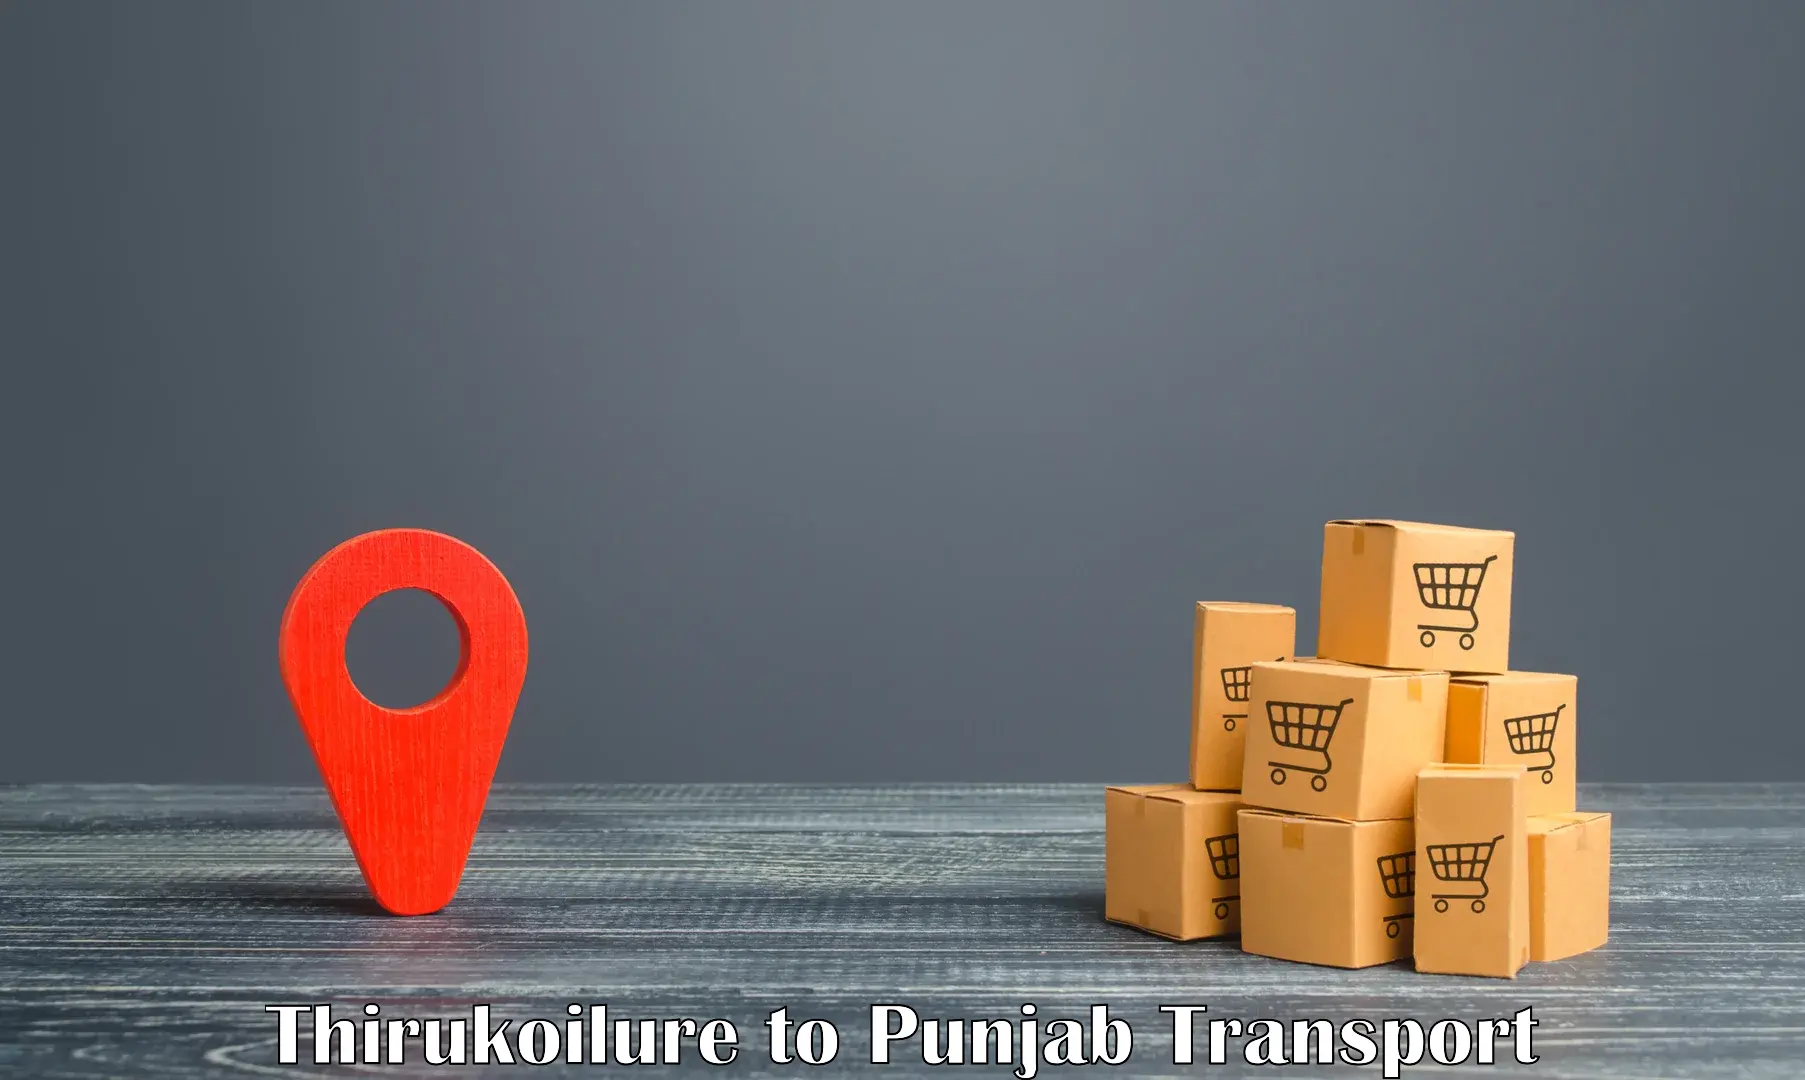 Cargo transport services Thirukoilure to Patiala